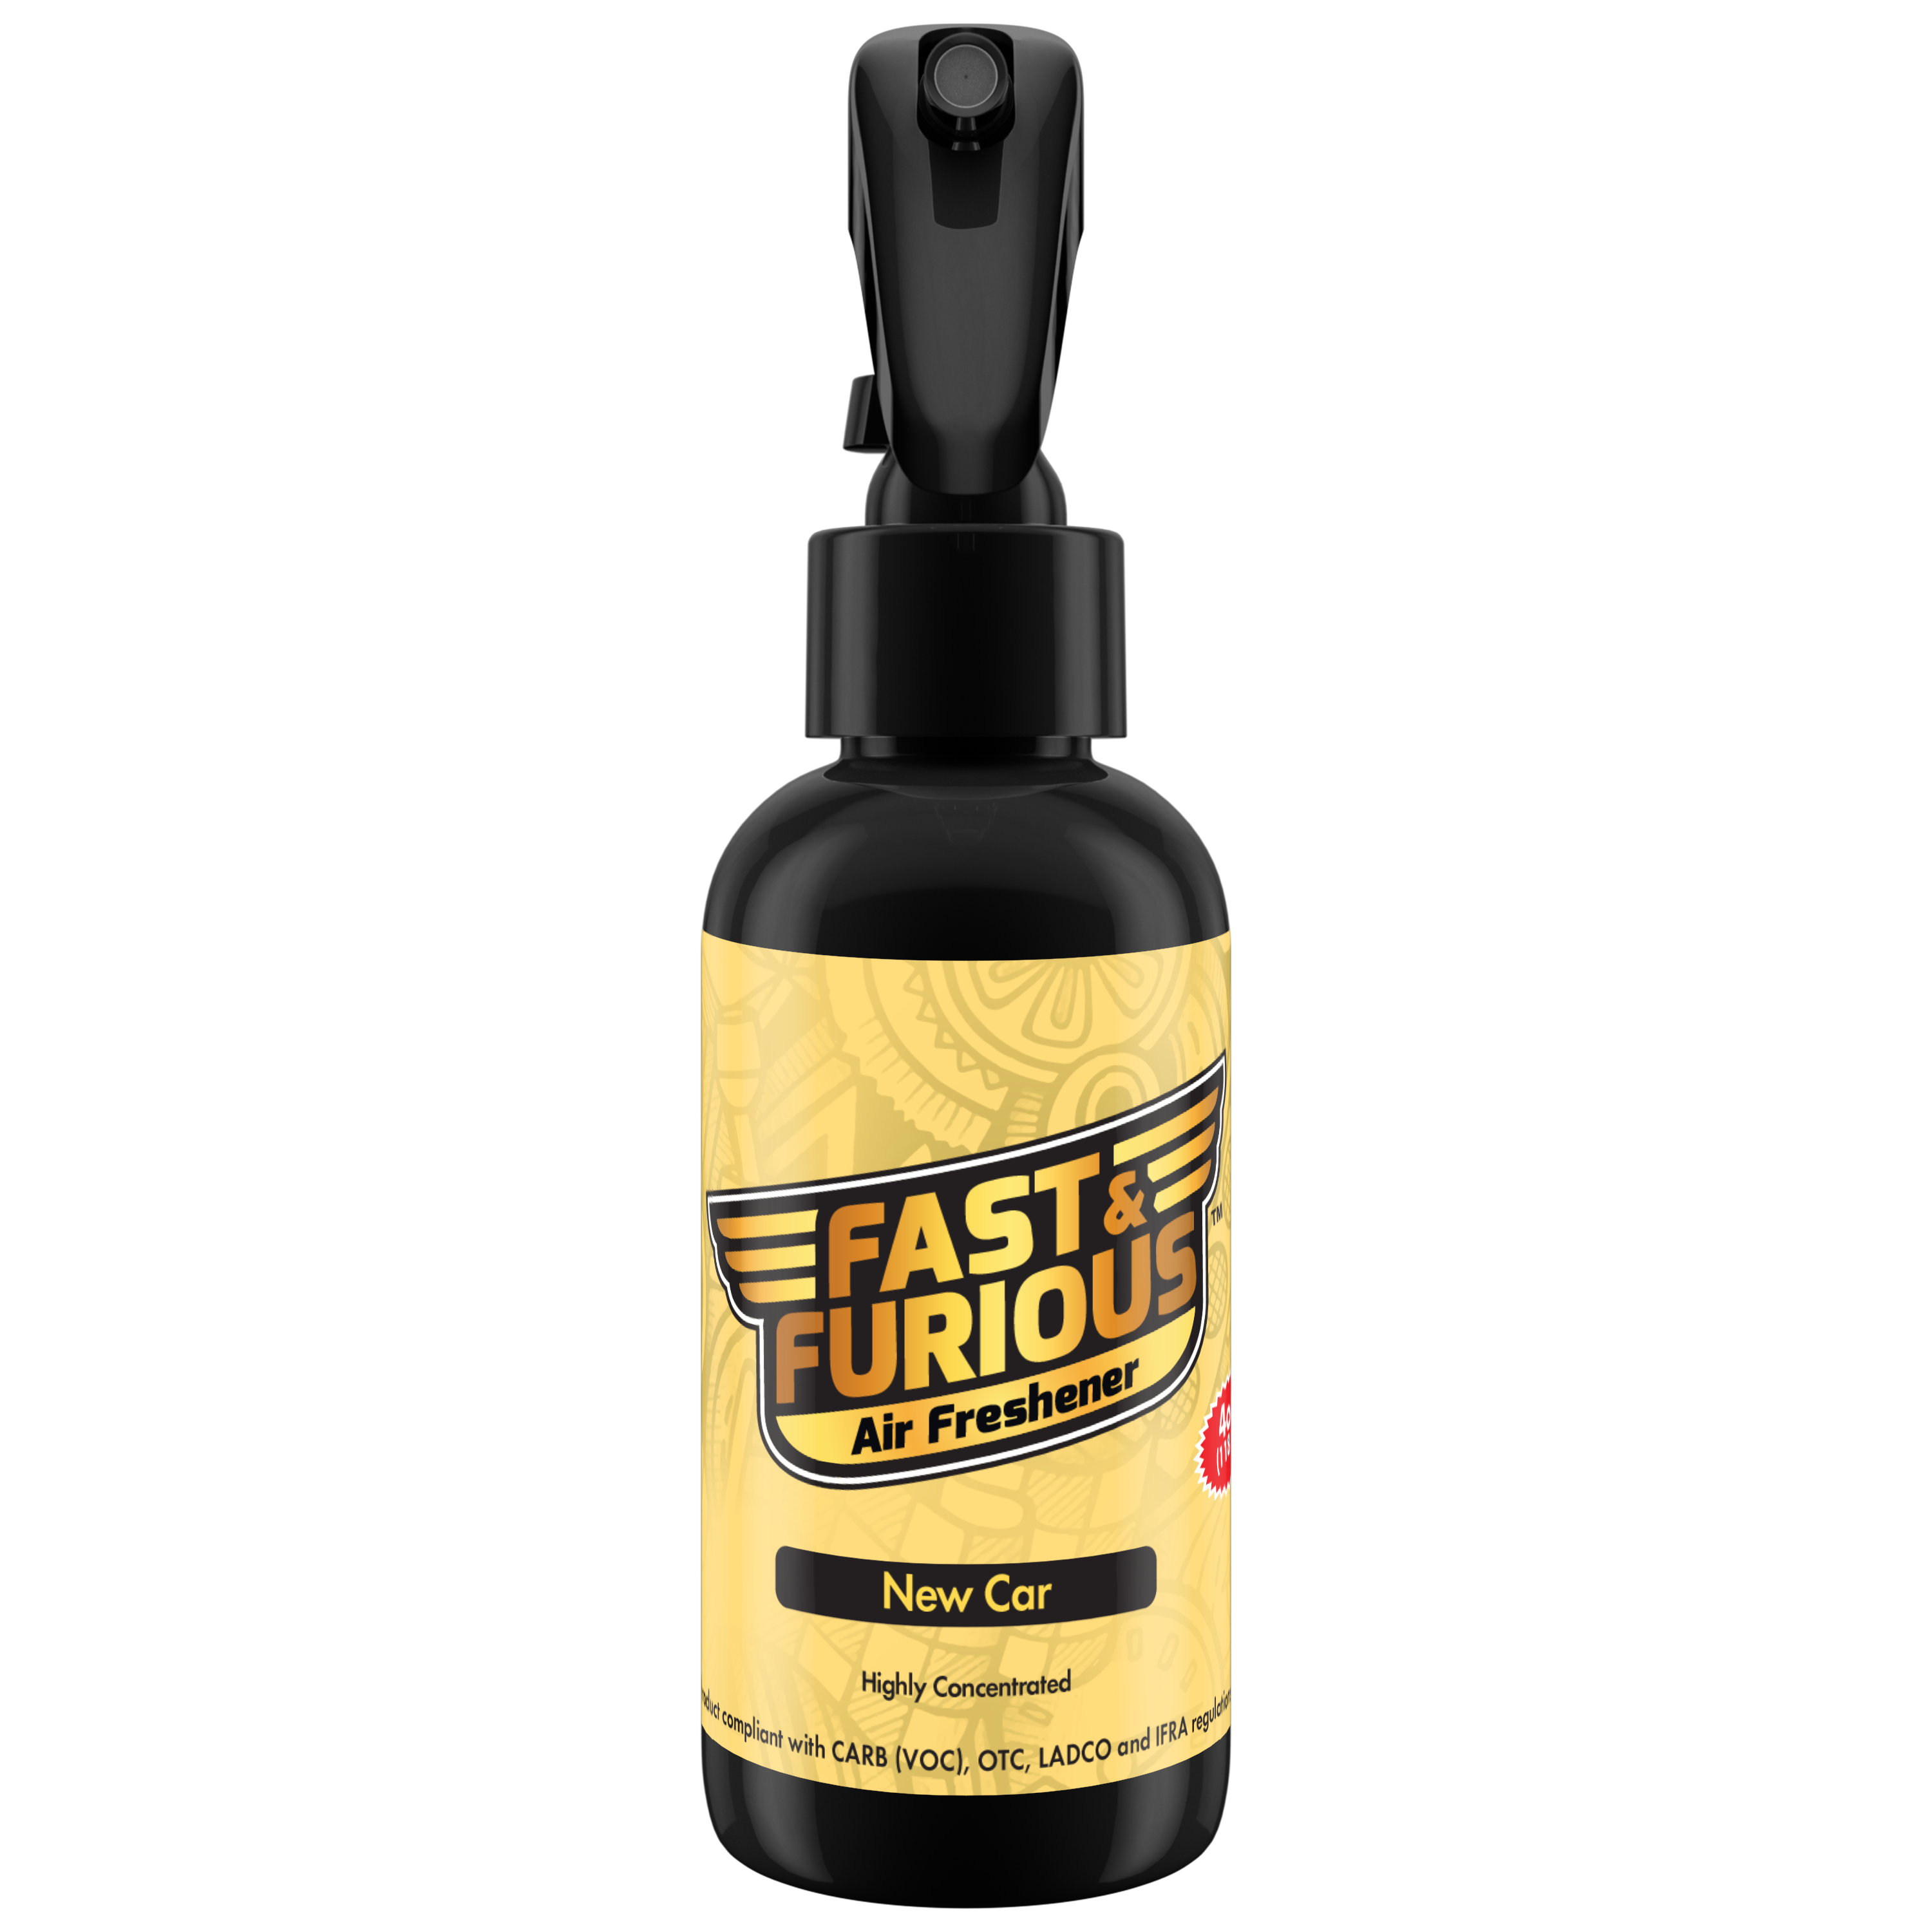 Fast and Furious Air Freshener - New Car Scent 4oz